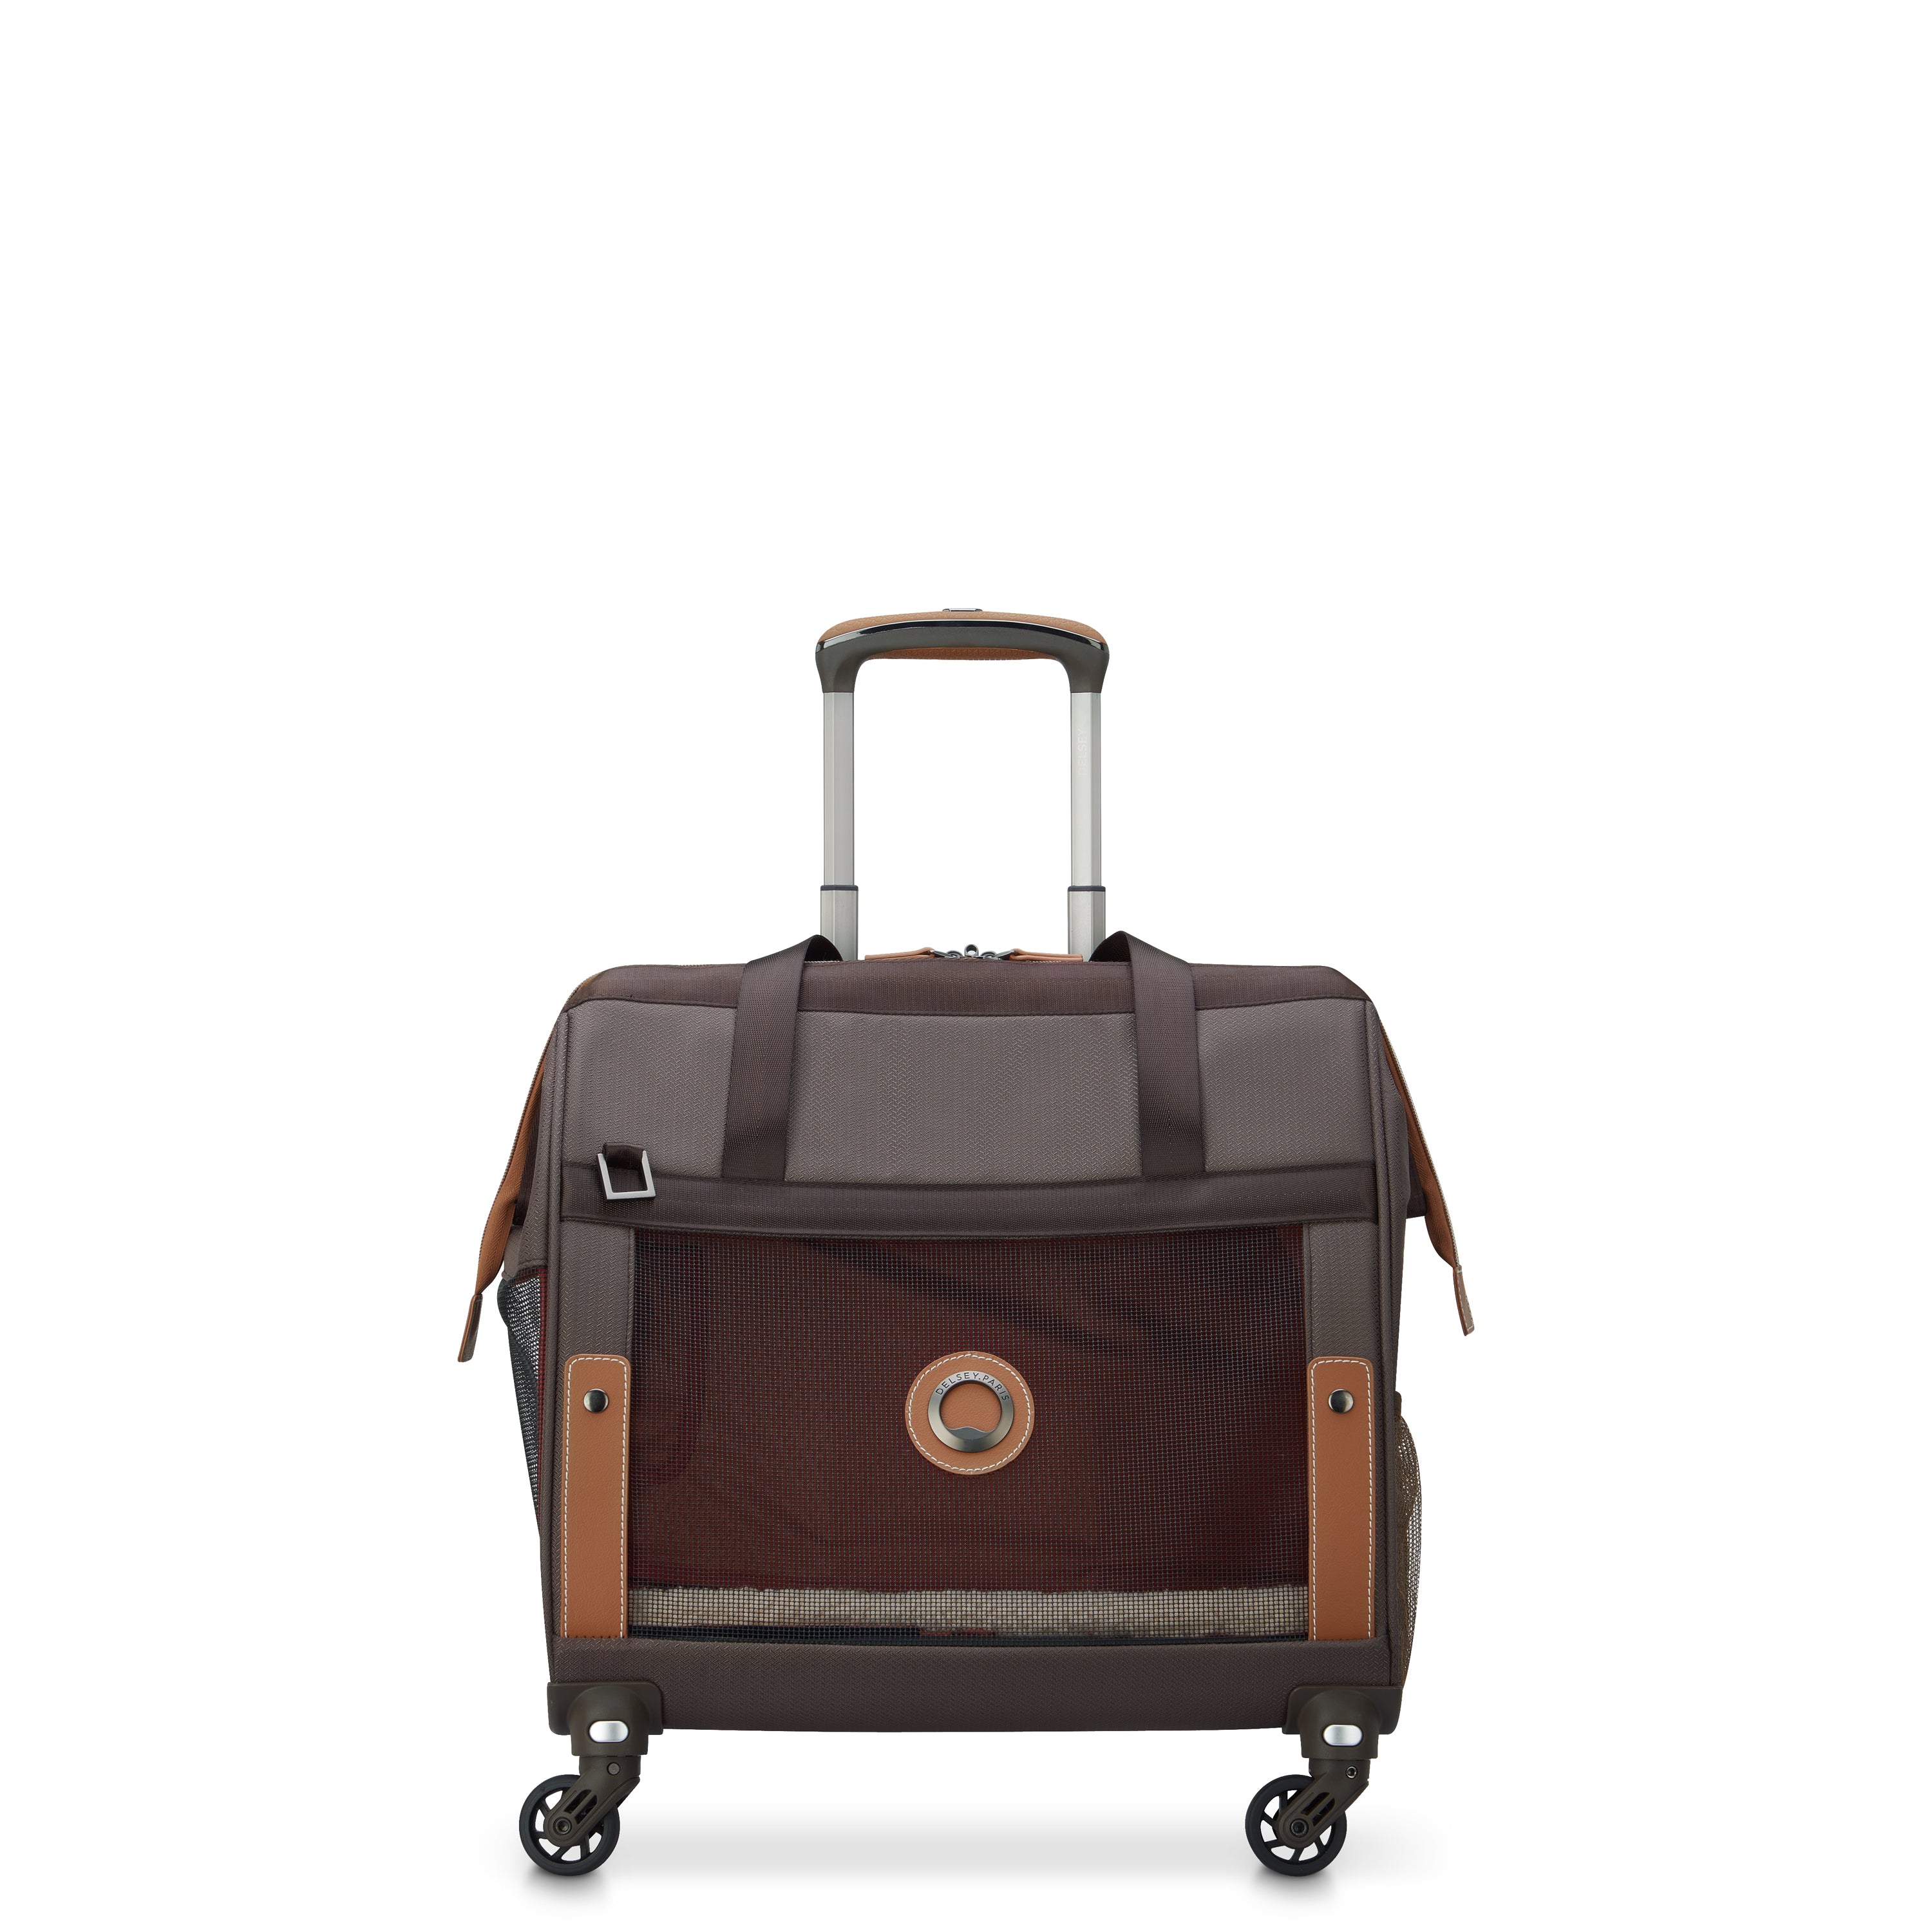 CHATELET AIR 2.0 TROLLEY